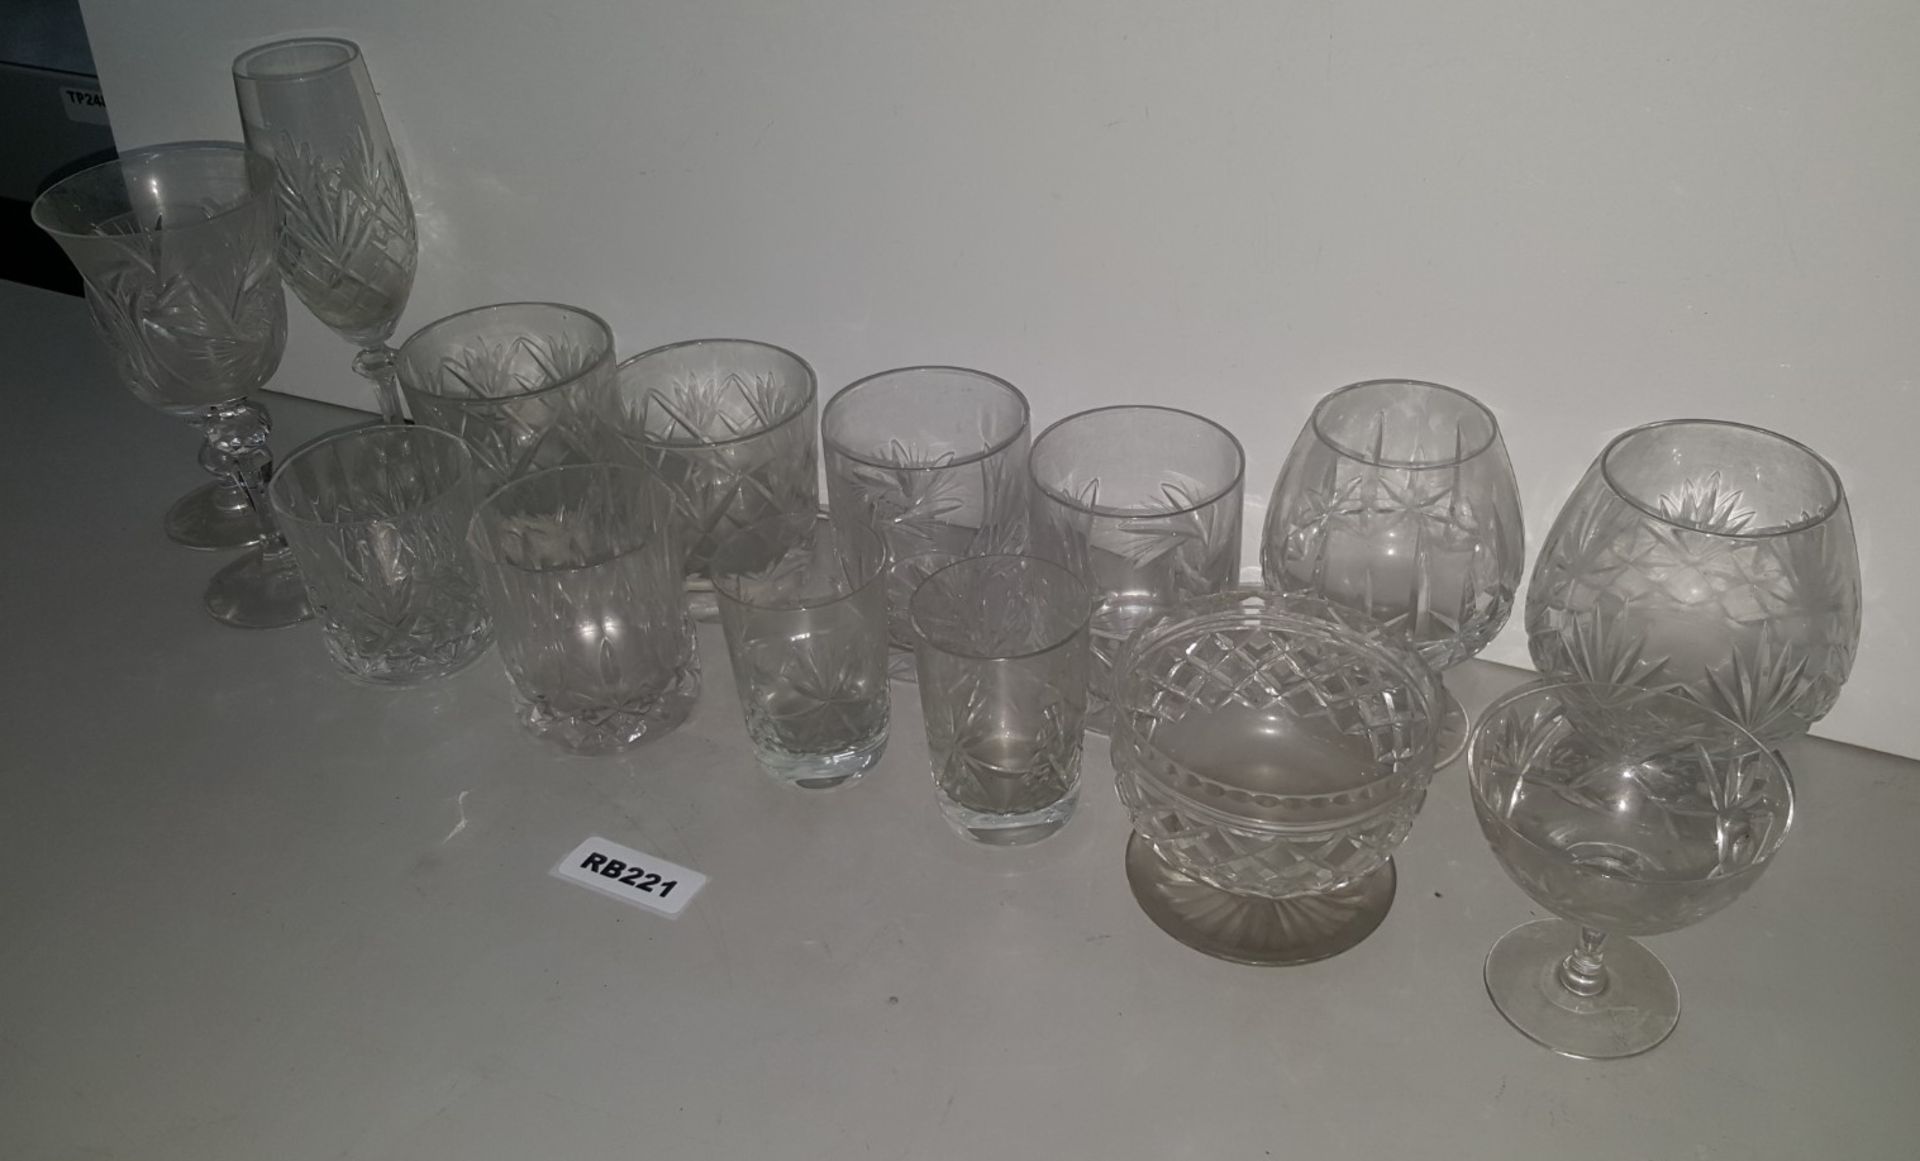 15 x Vintage Cut Glass Drinking Glasses - Ref RB221 I - Image 5 of 5